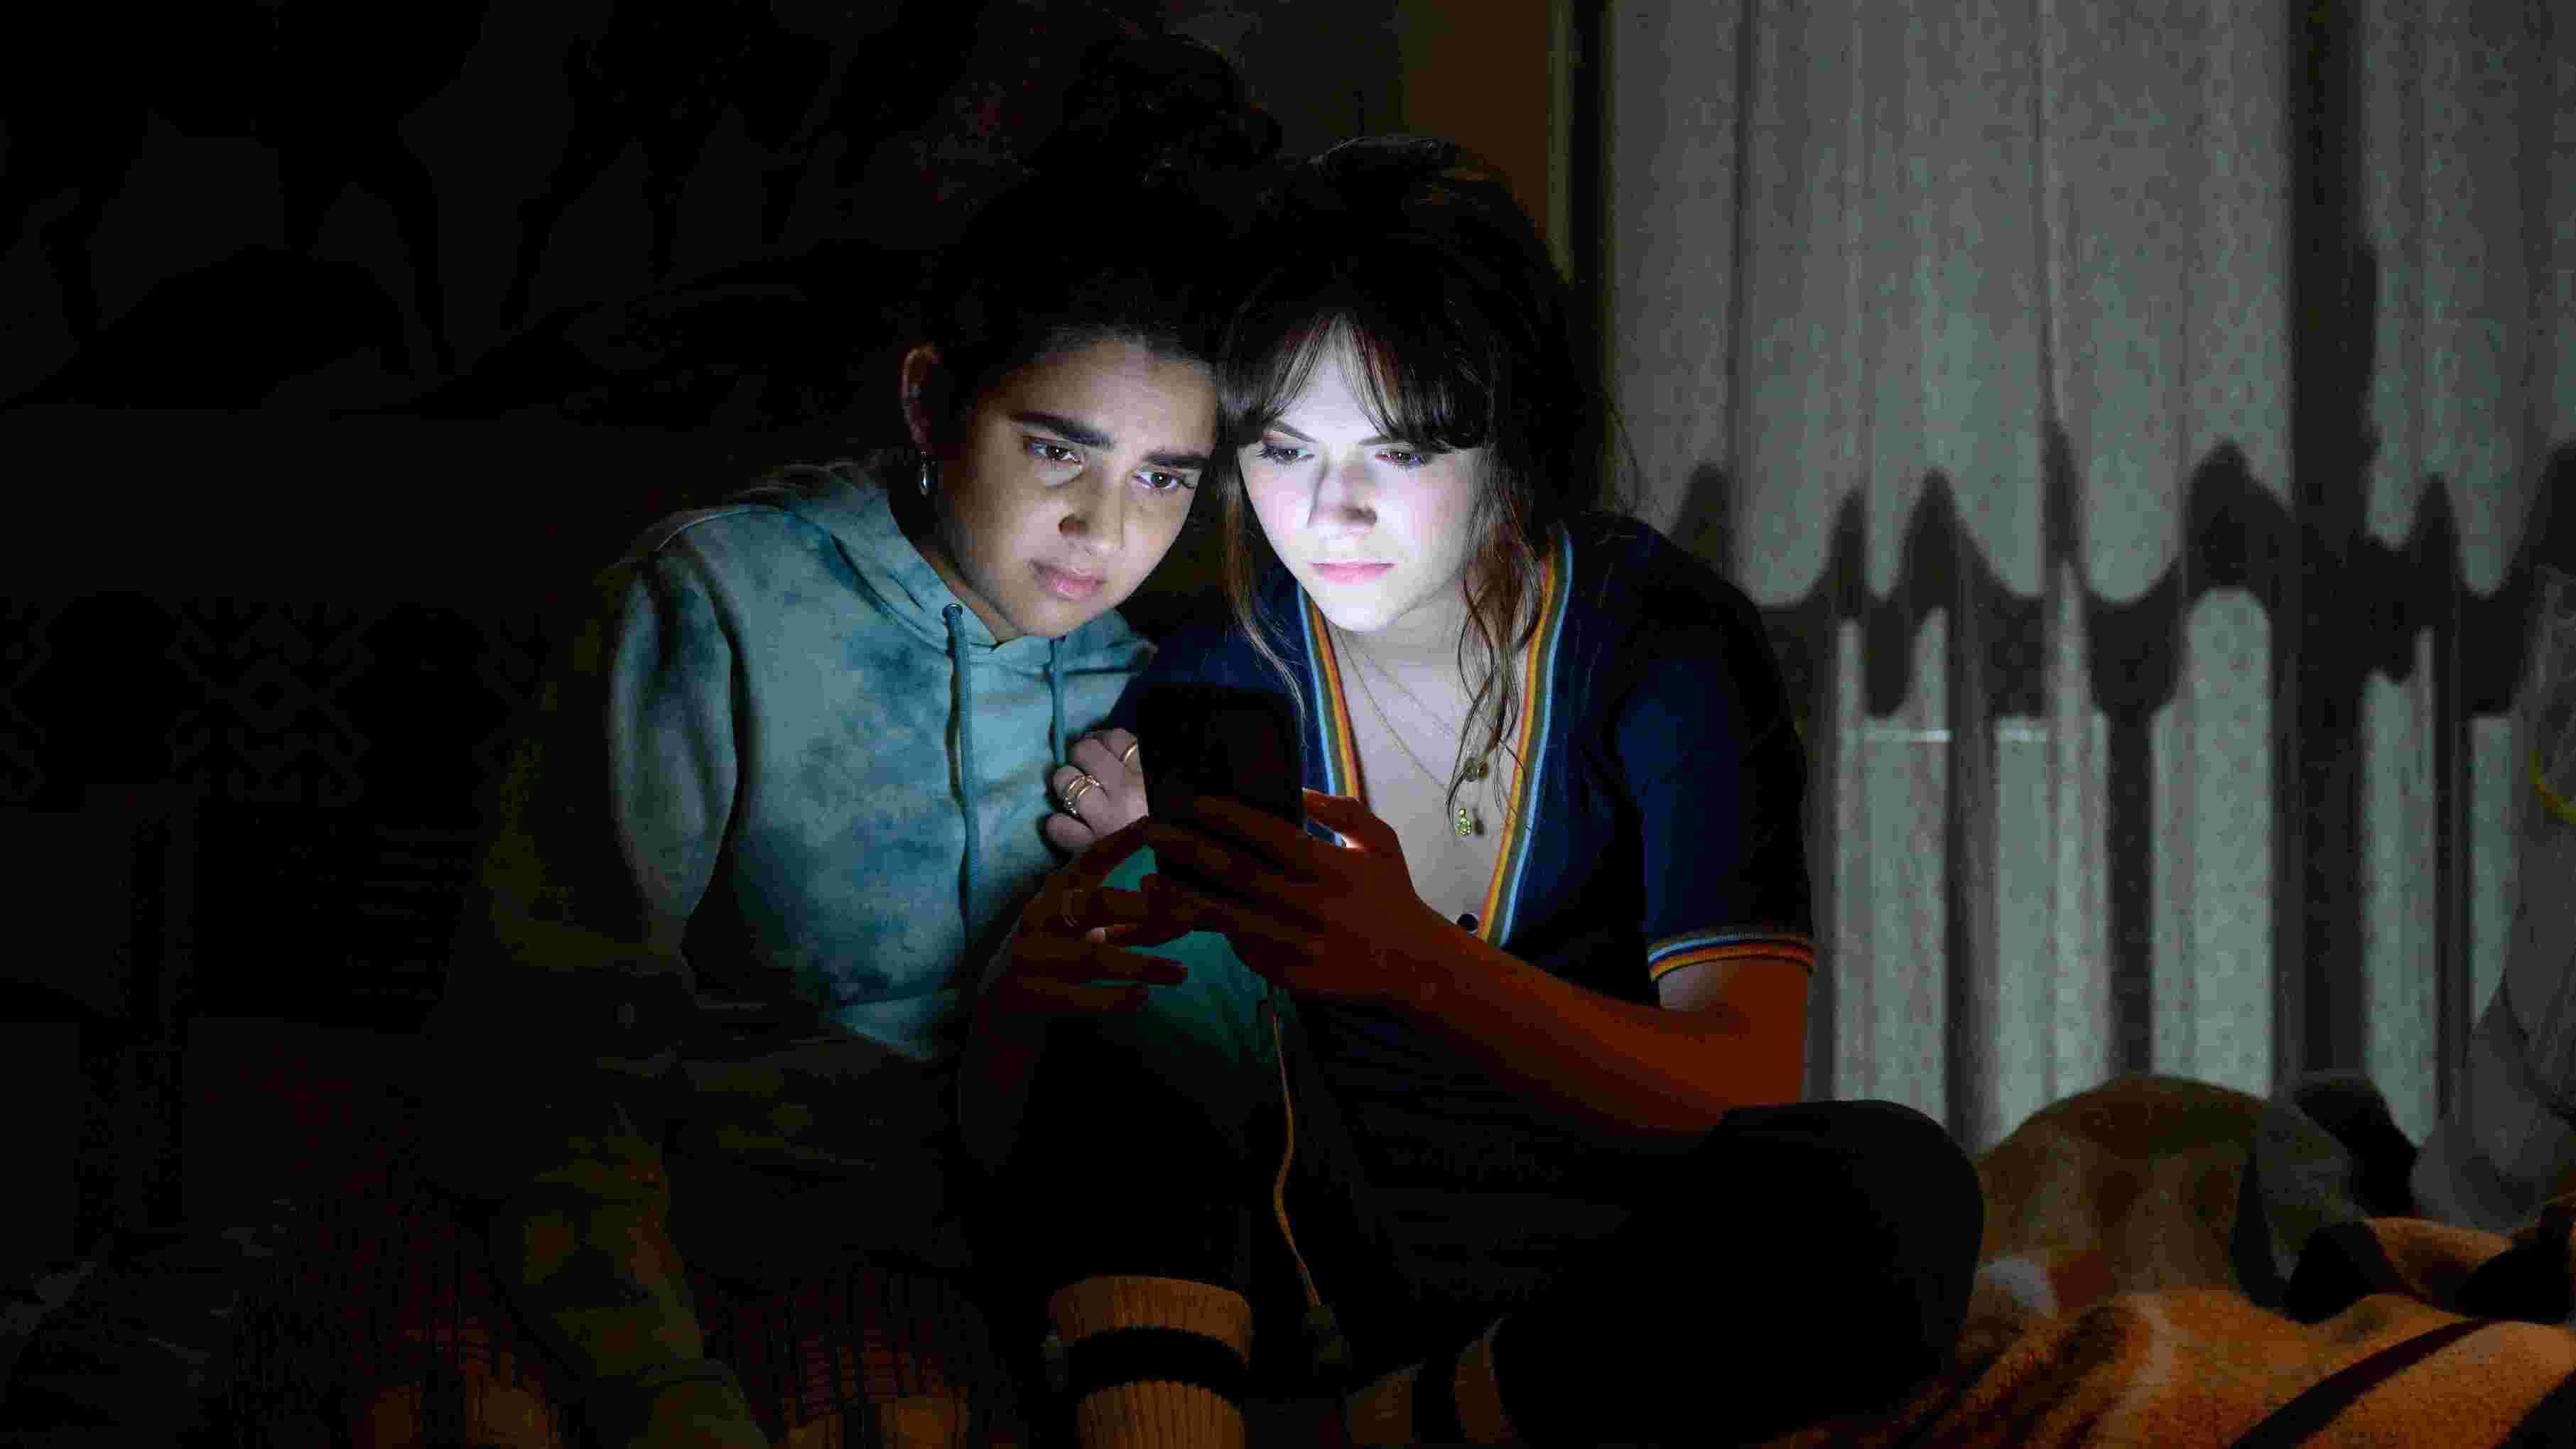 Two young women huddle in the darkness their faces illuminated by the light of a cell phone they are both looking at.